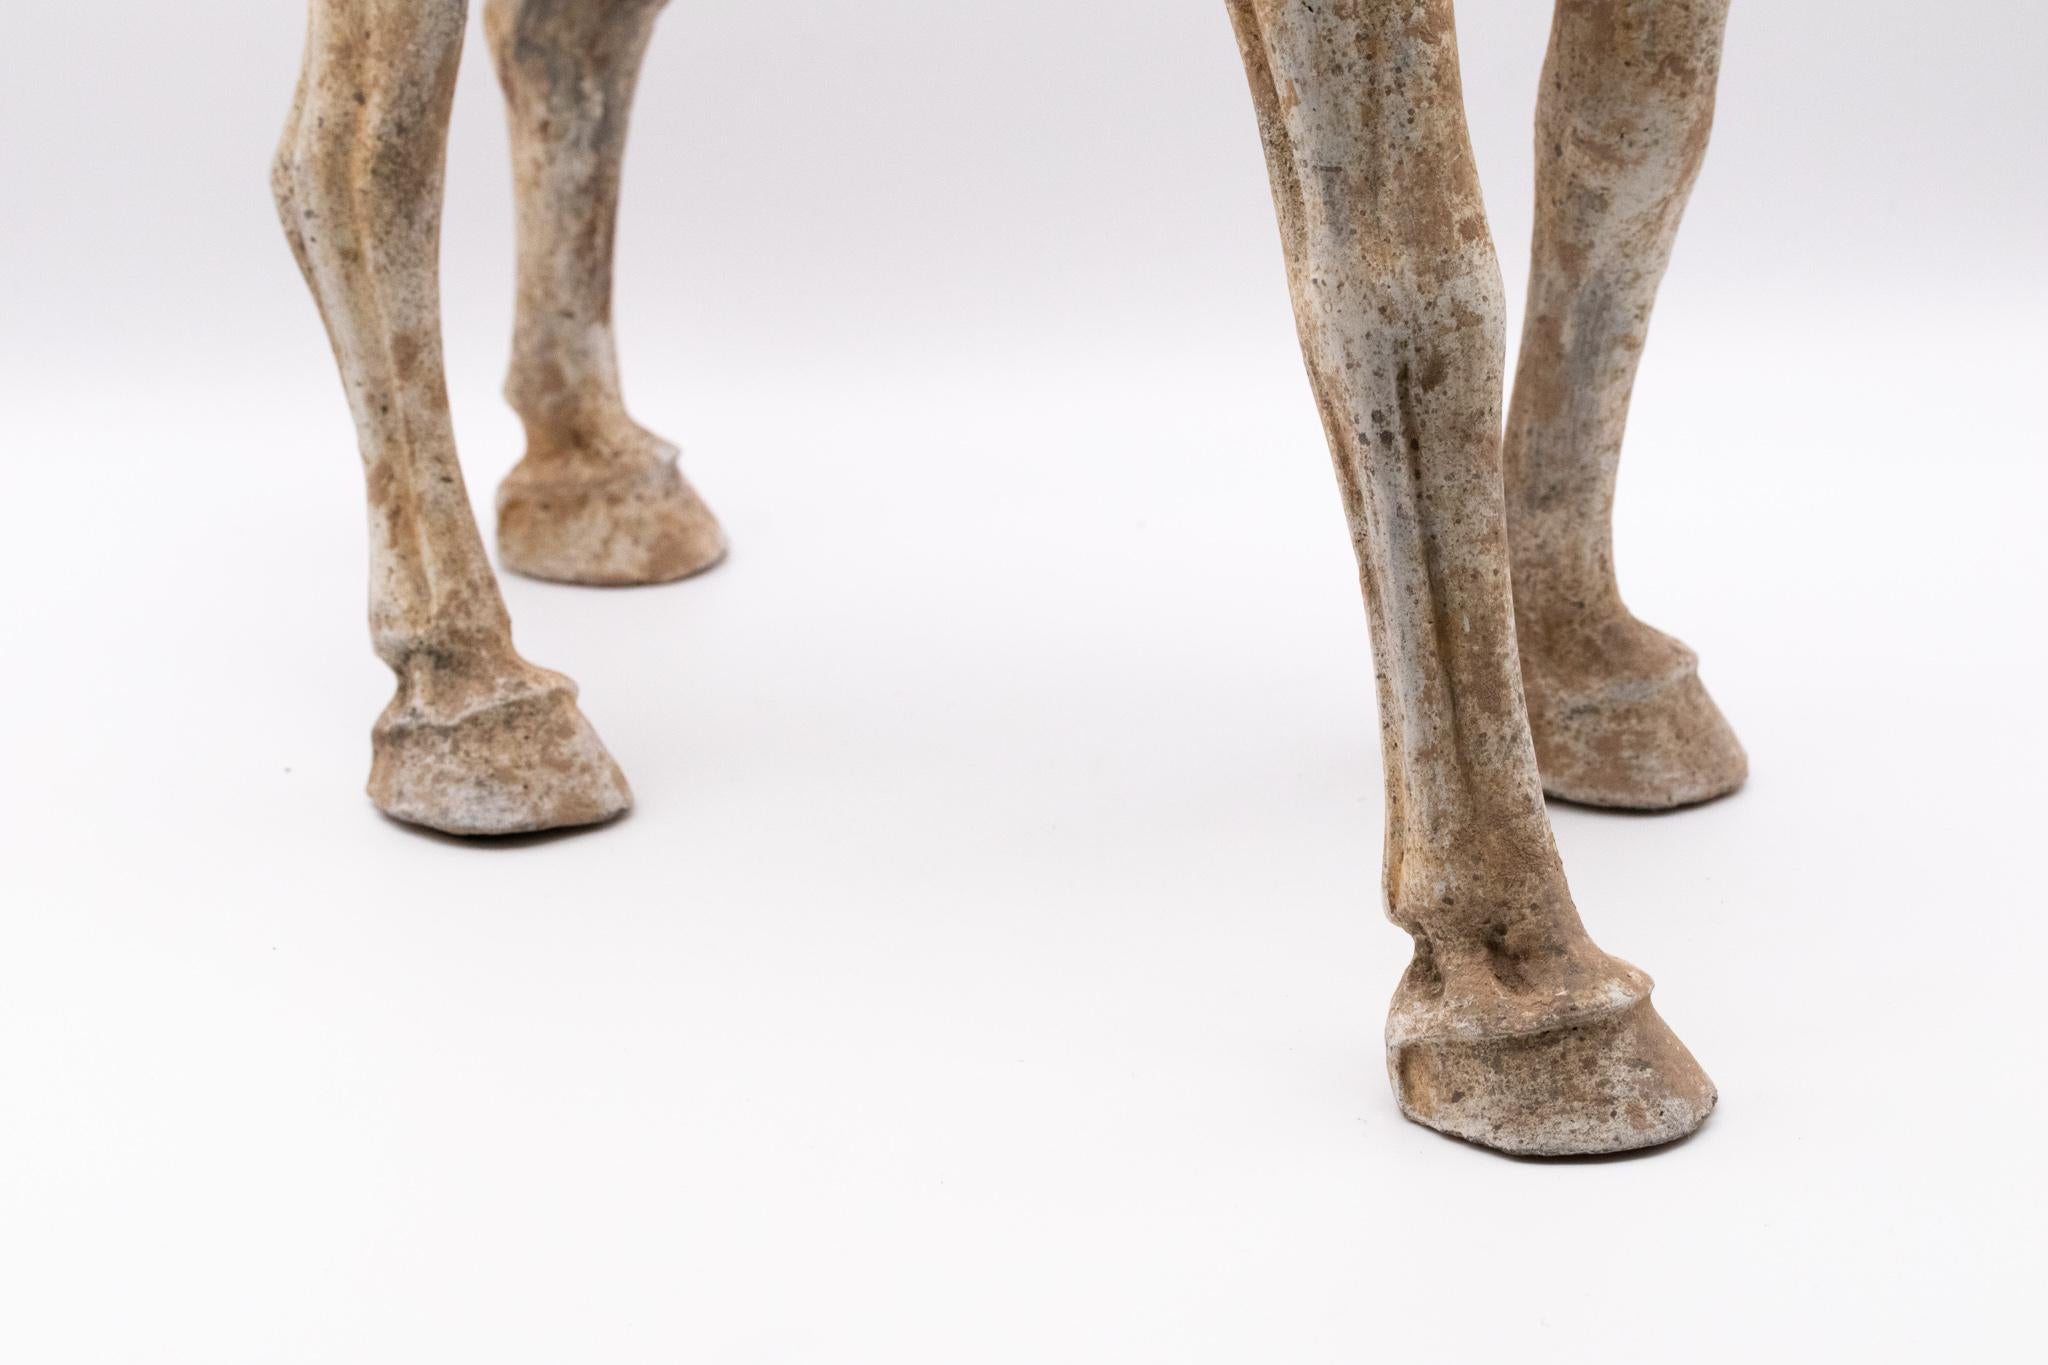 Chinese China 618-907 Ad Tang Dynasty Ancient Earthenware Sculpture of a Walking Horse For Sale